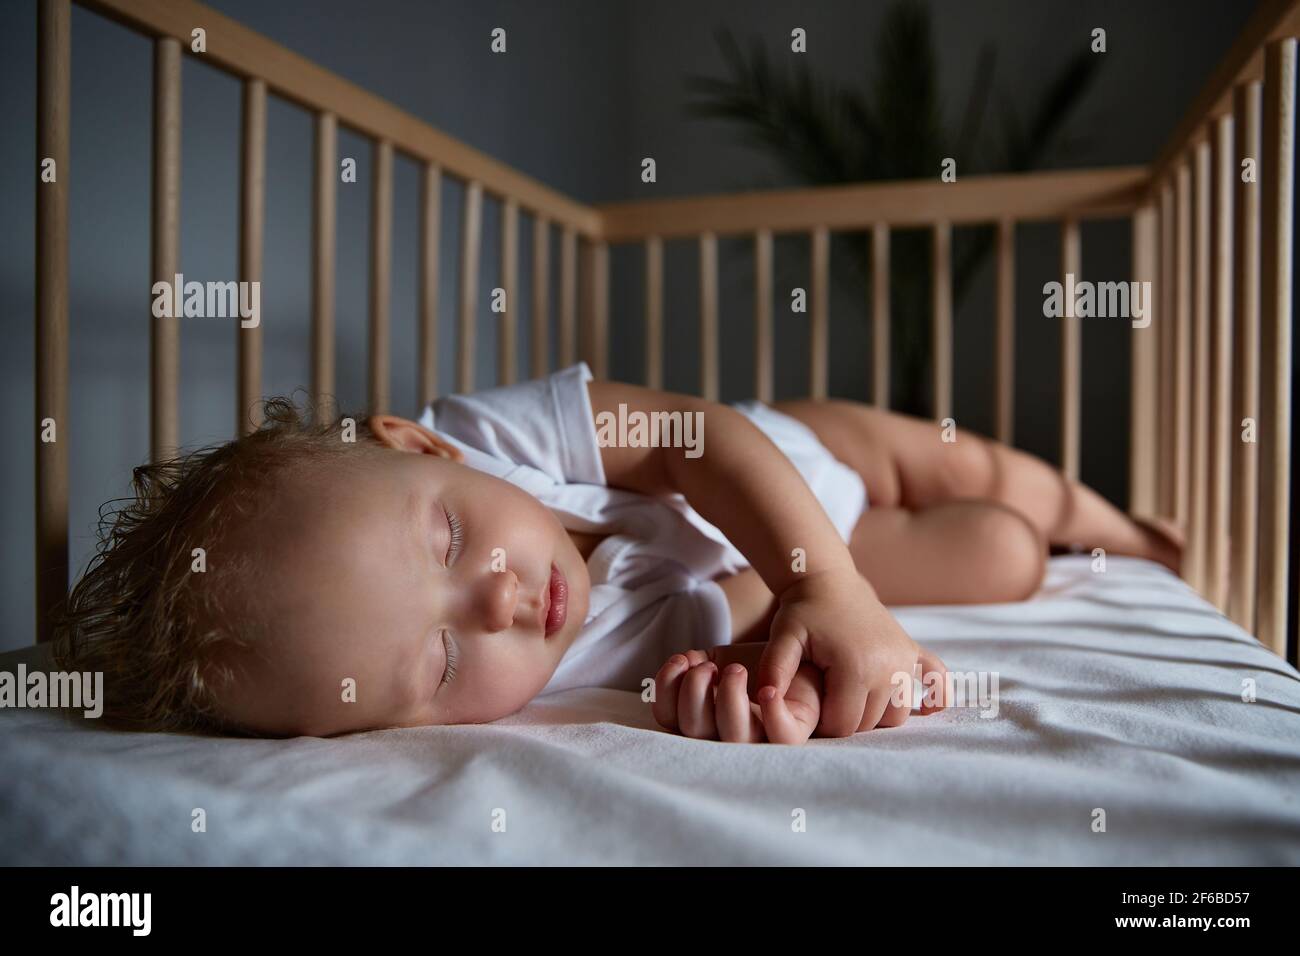 Cute baby sleeps at night in a cradle for babies without a canopy and bumpers. Safe sleep in a dark, spacious room with a cot and a flower. Interior o Stock Photo